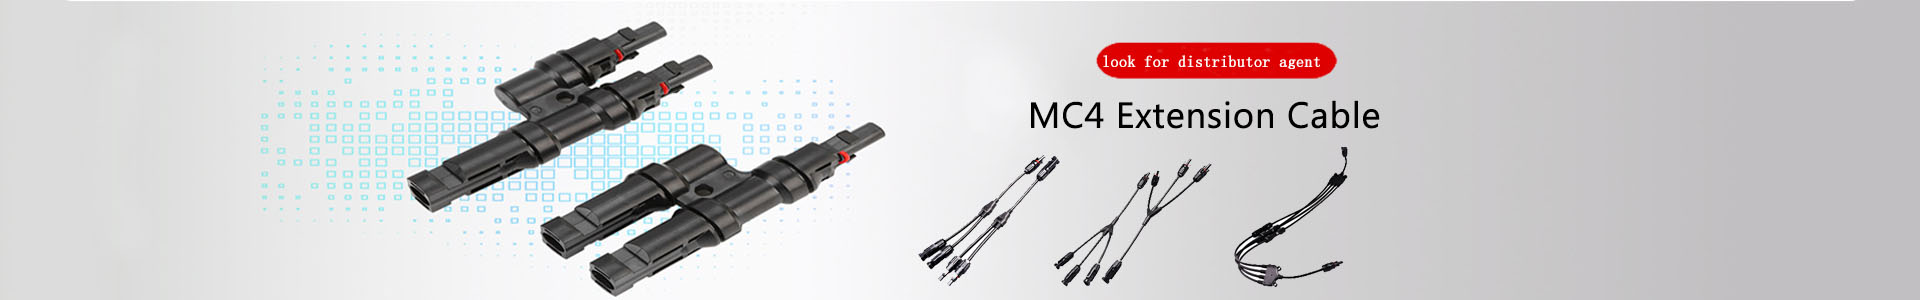 Project Case | Handwe Group-Solar | solar connector,solar branch connector,diode fuse connector,MC4 extnsion cable,H1Z2Z2 solar cable, UL4703 solar cable | Leading manufacturer and supplier of solar pv cables and connectors